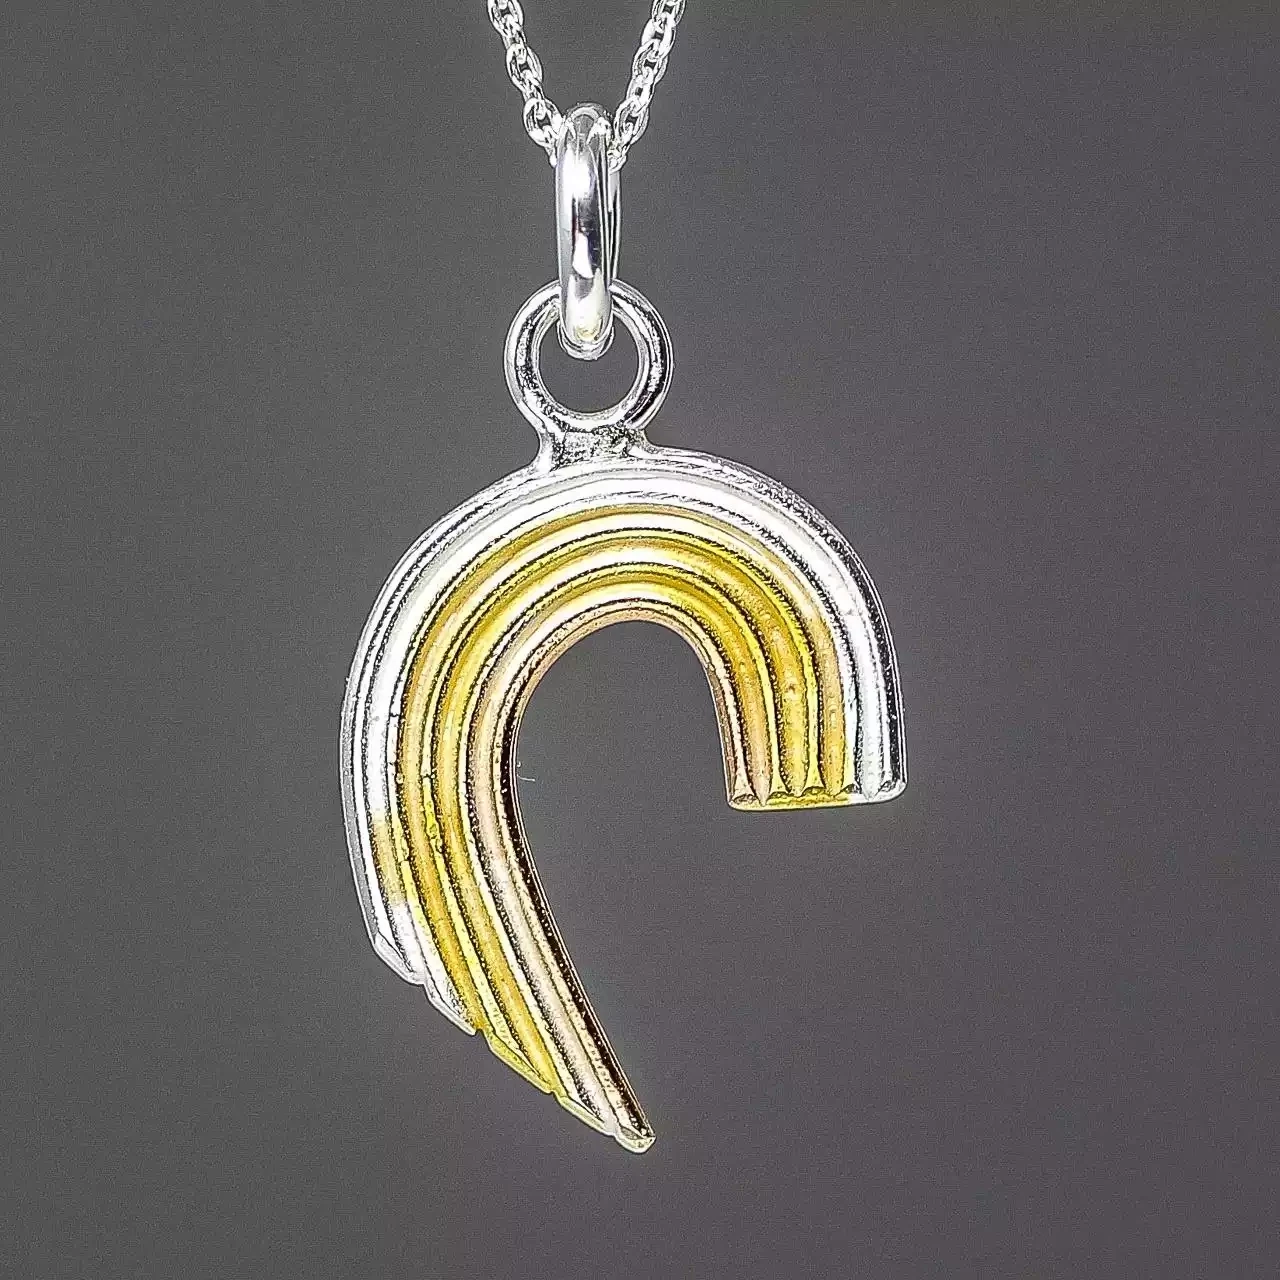 Curling Rainbow silver and gold plated pendant - large by Fi Mehra